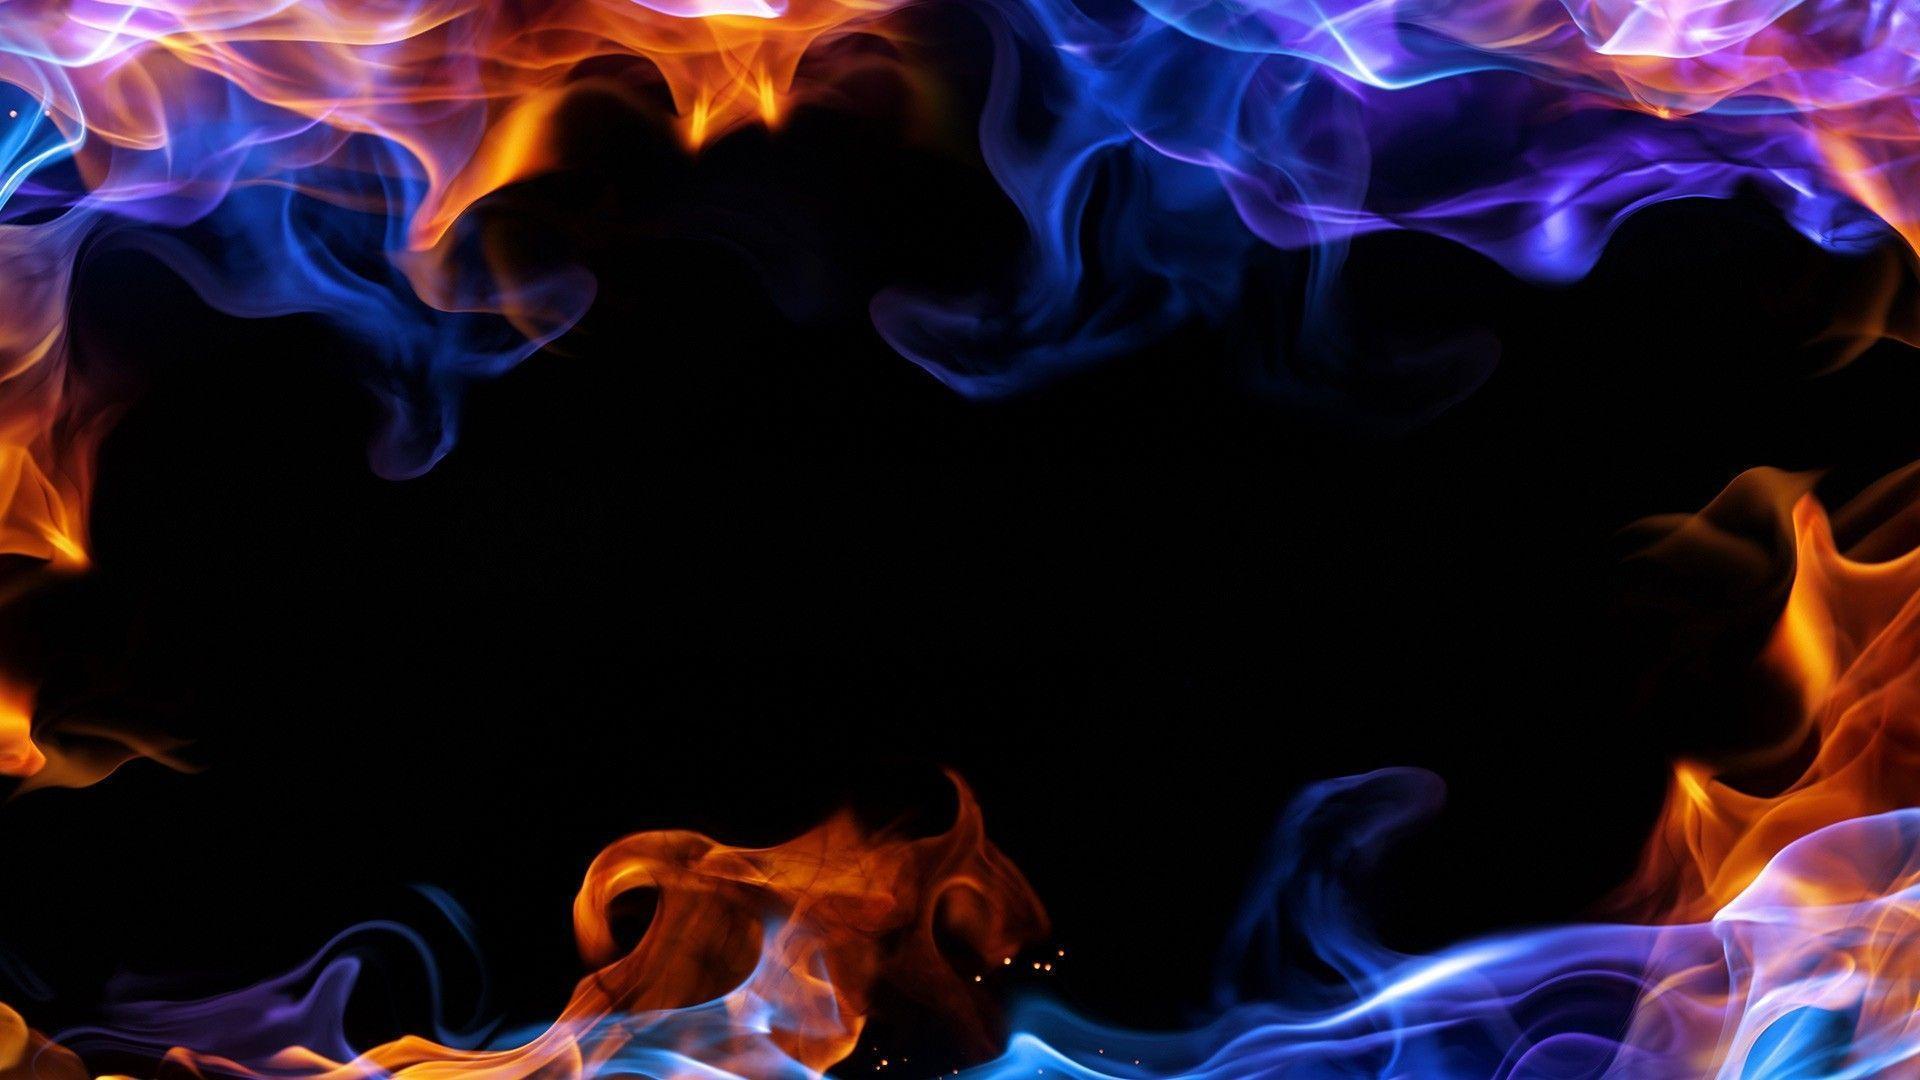 Wallpaper For > Cool Background Of Colorful Fire